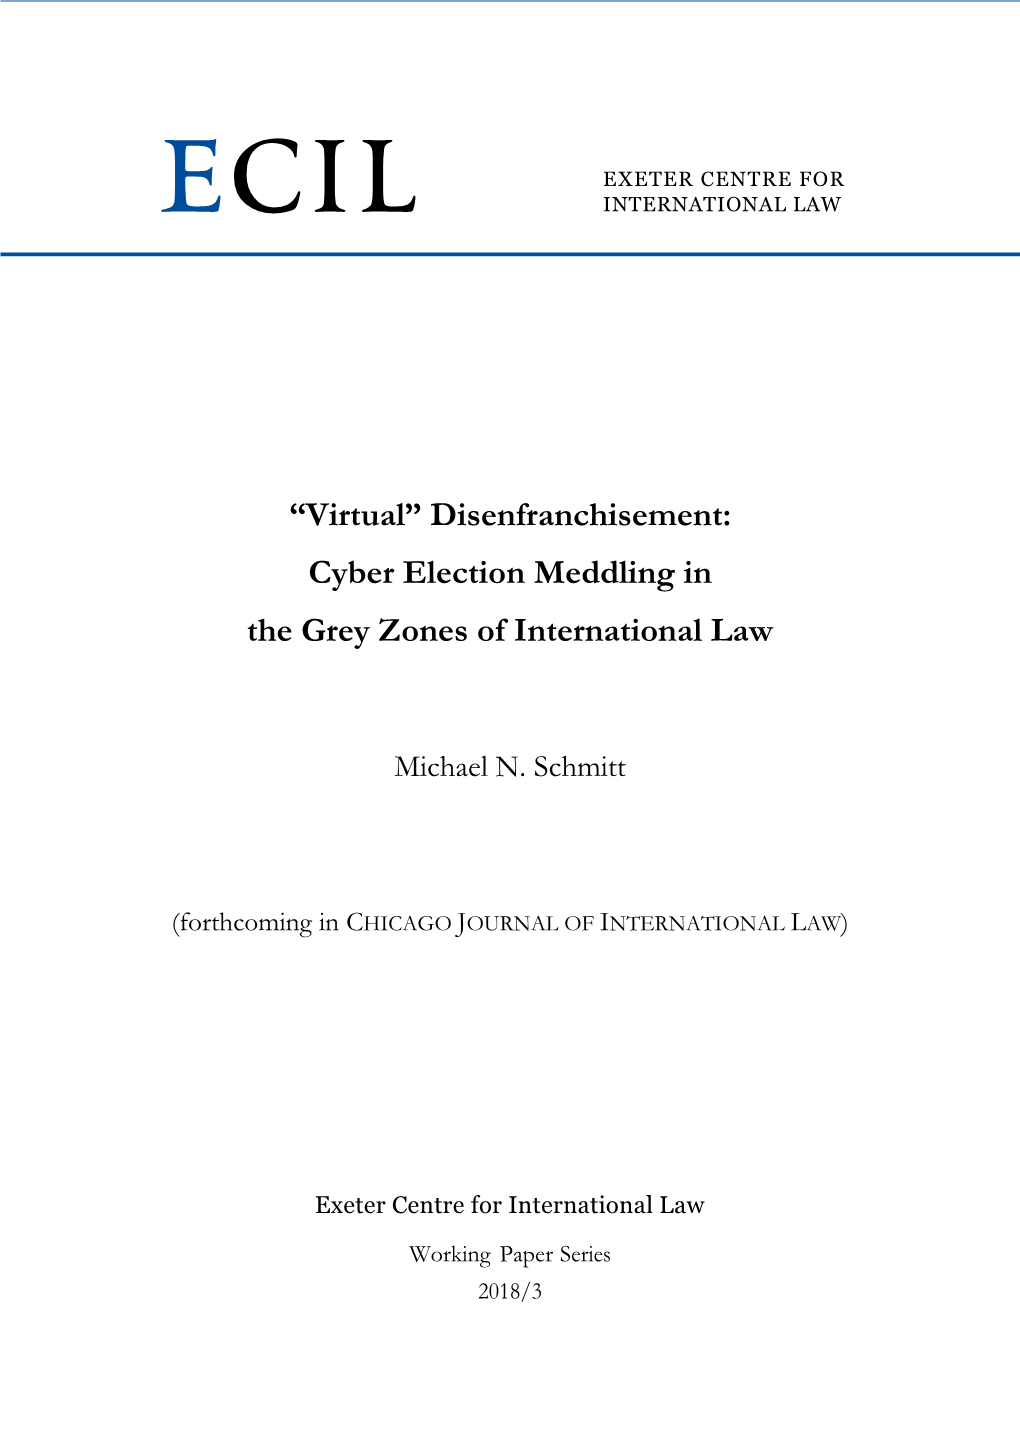 Cyber Election Meddling in the Grey Zones of International Law’, ECIL Working Paper 2018/3 (Forthcoming in Chicago Journal of International Law)